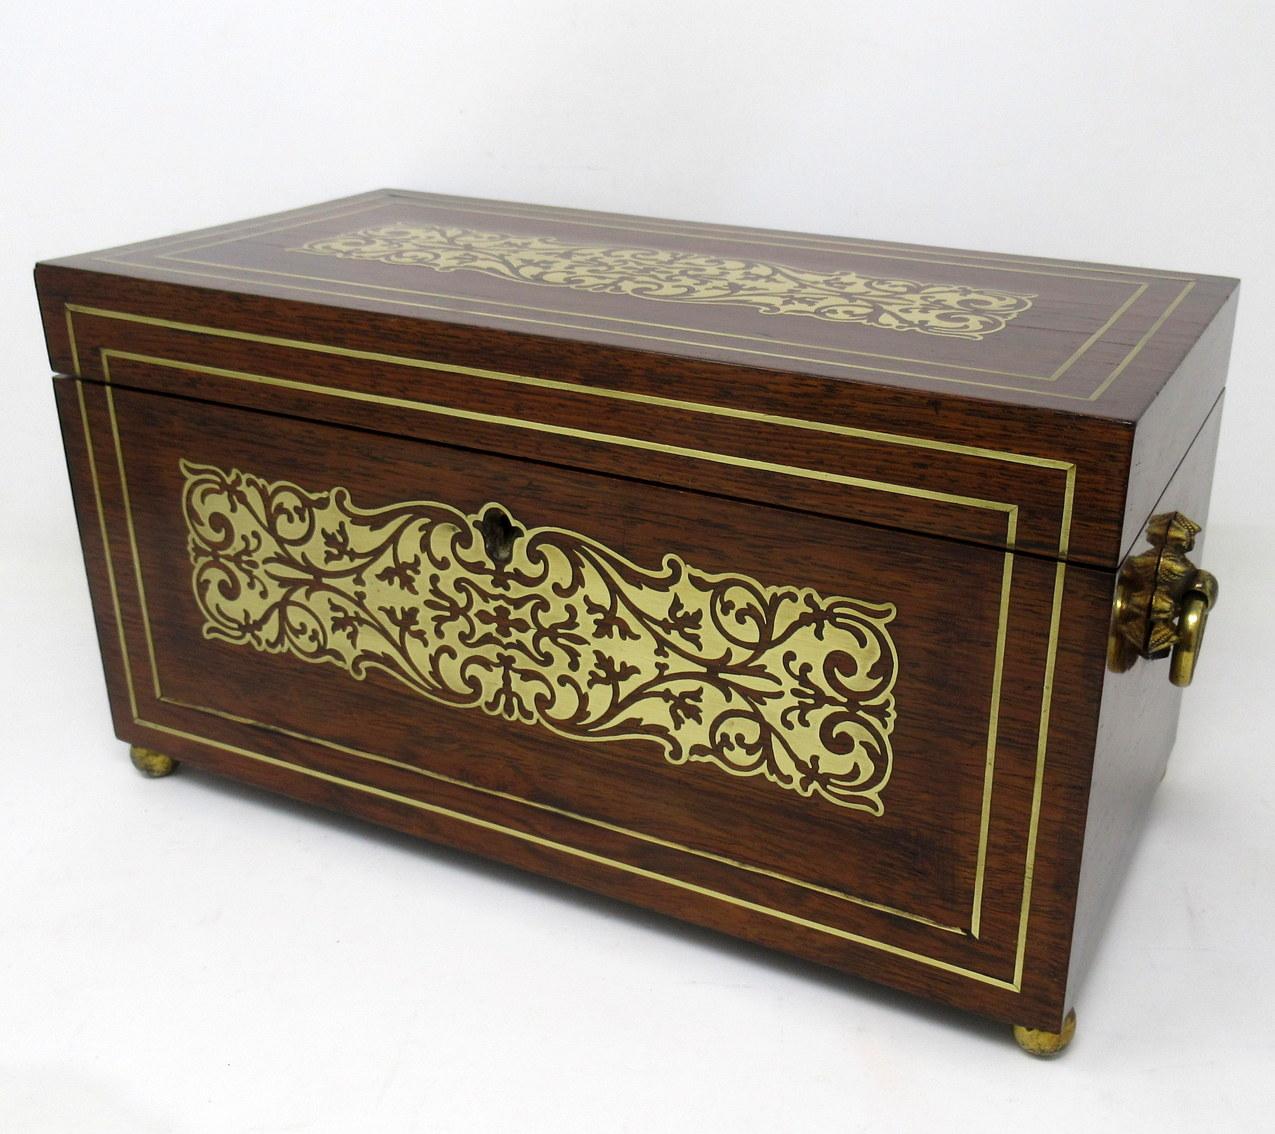 Superb Example of an English Regency well grained Mahogany Double Tea Caddy of traditional rectangular outline, with lavish brass scrolling inlay decoration and complete fitted interior to include two firm fitting hinged lid lift-out sliding